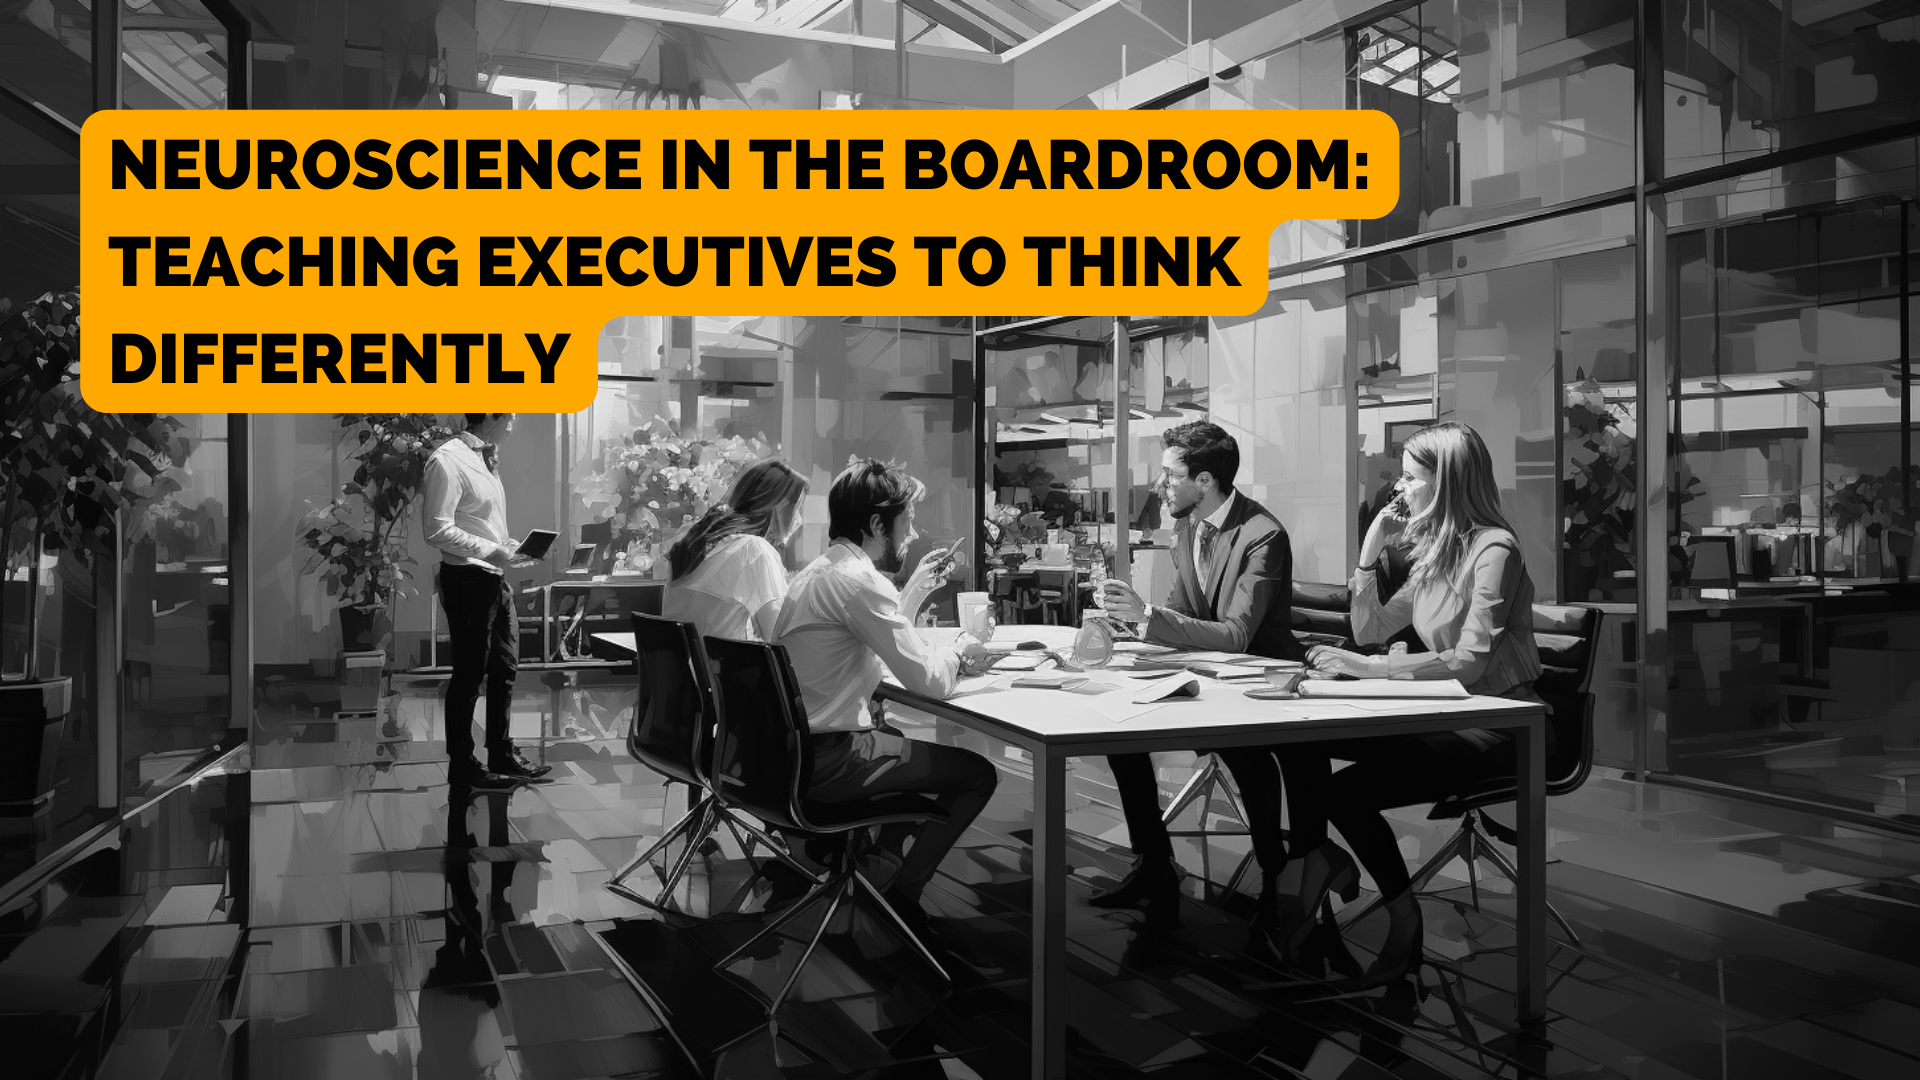 Neuroscience in the Boardroom: Teaching Executives to Think Differently